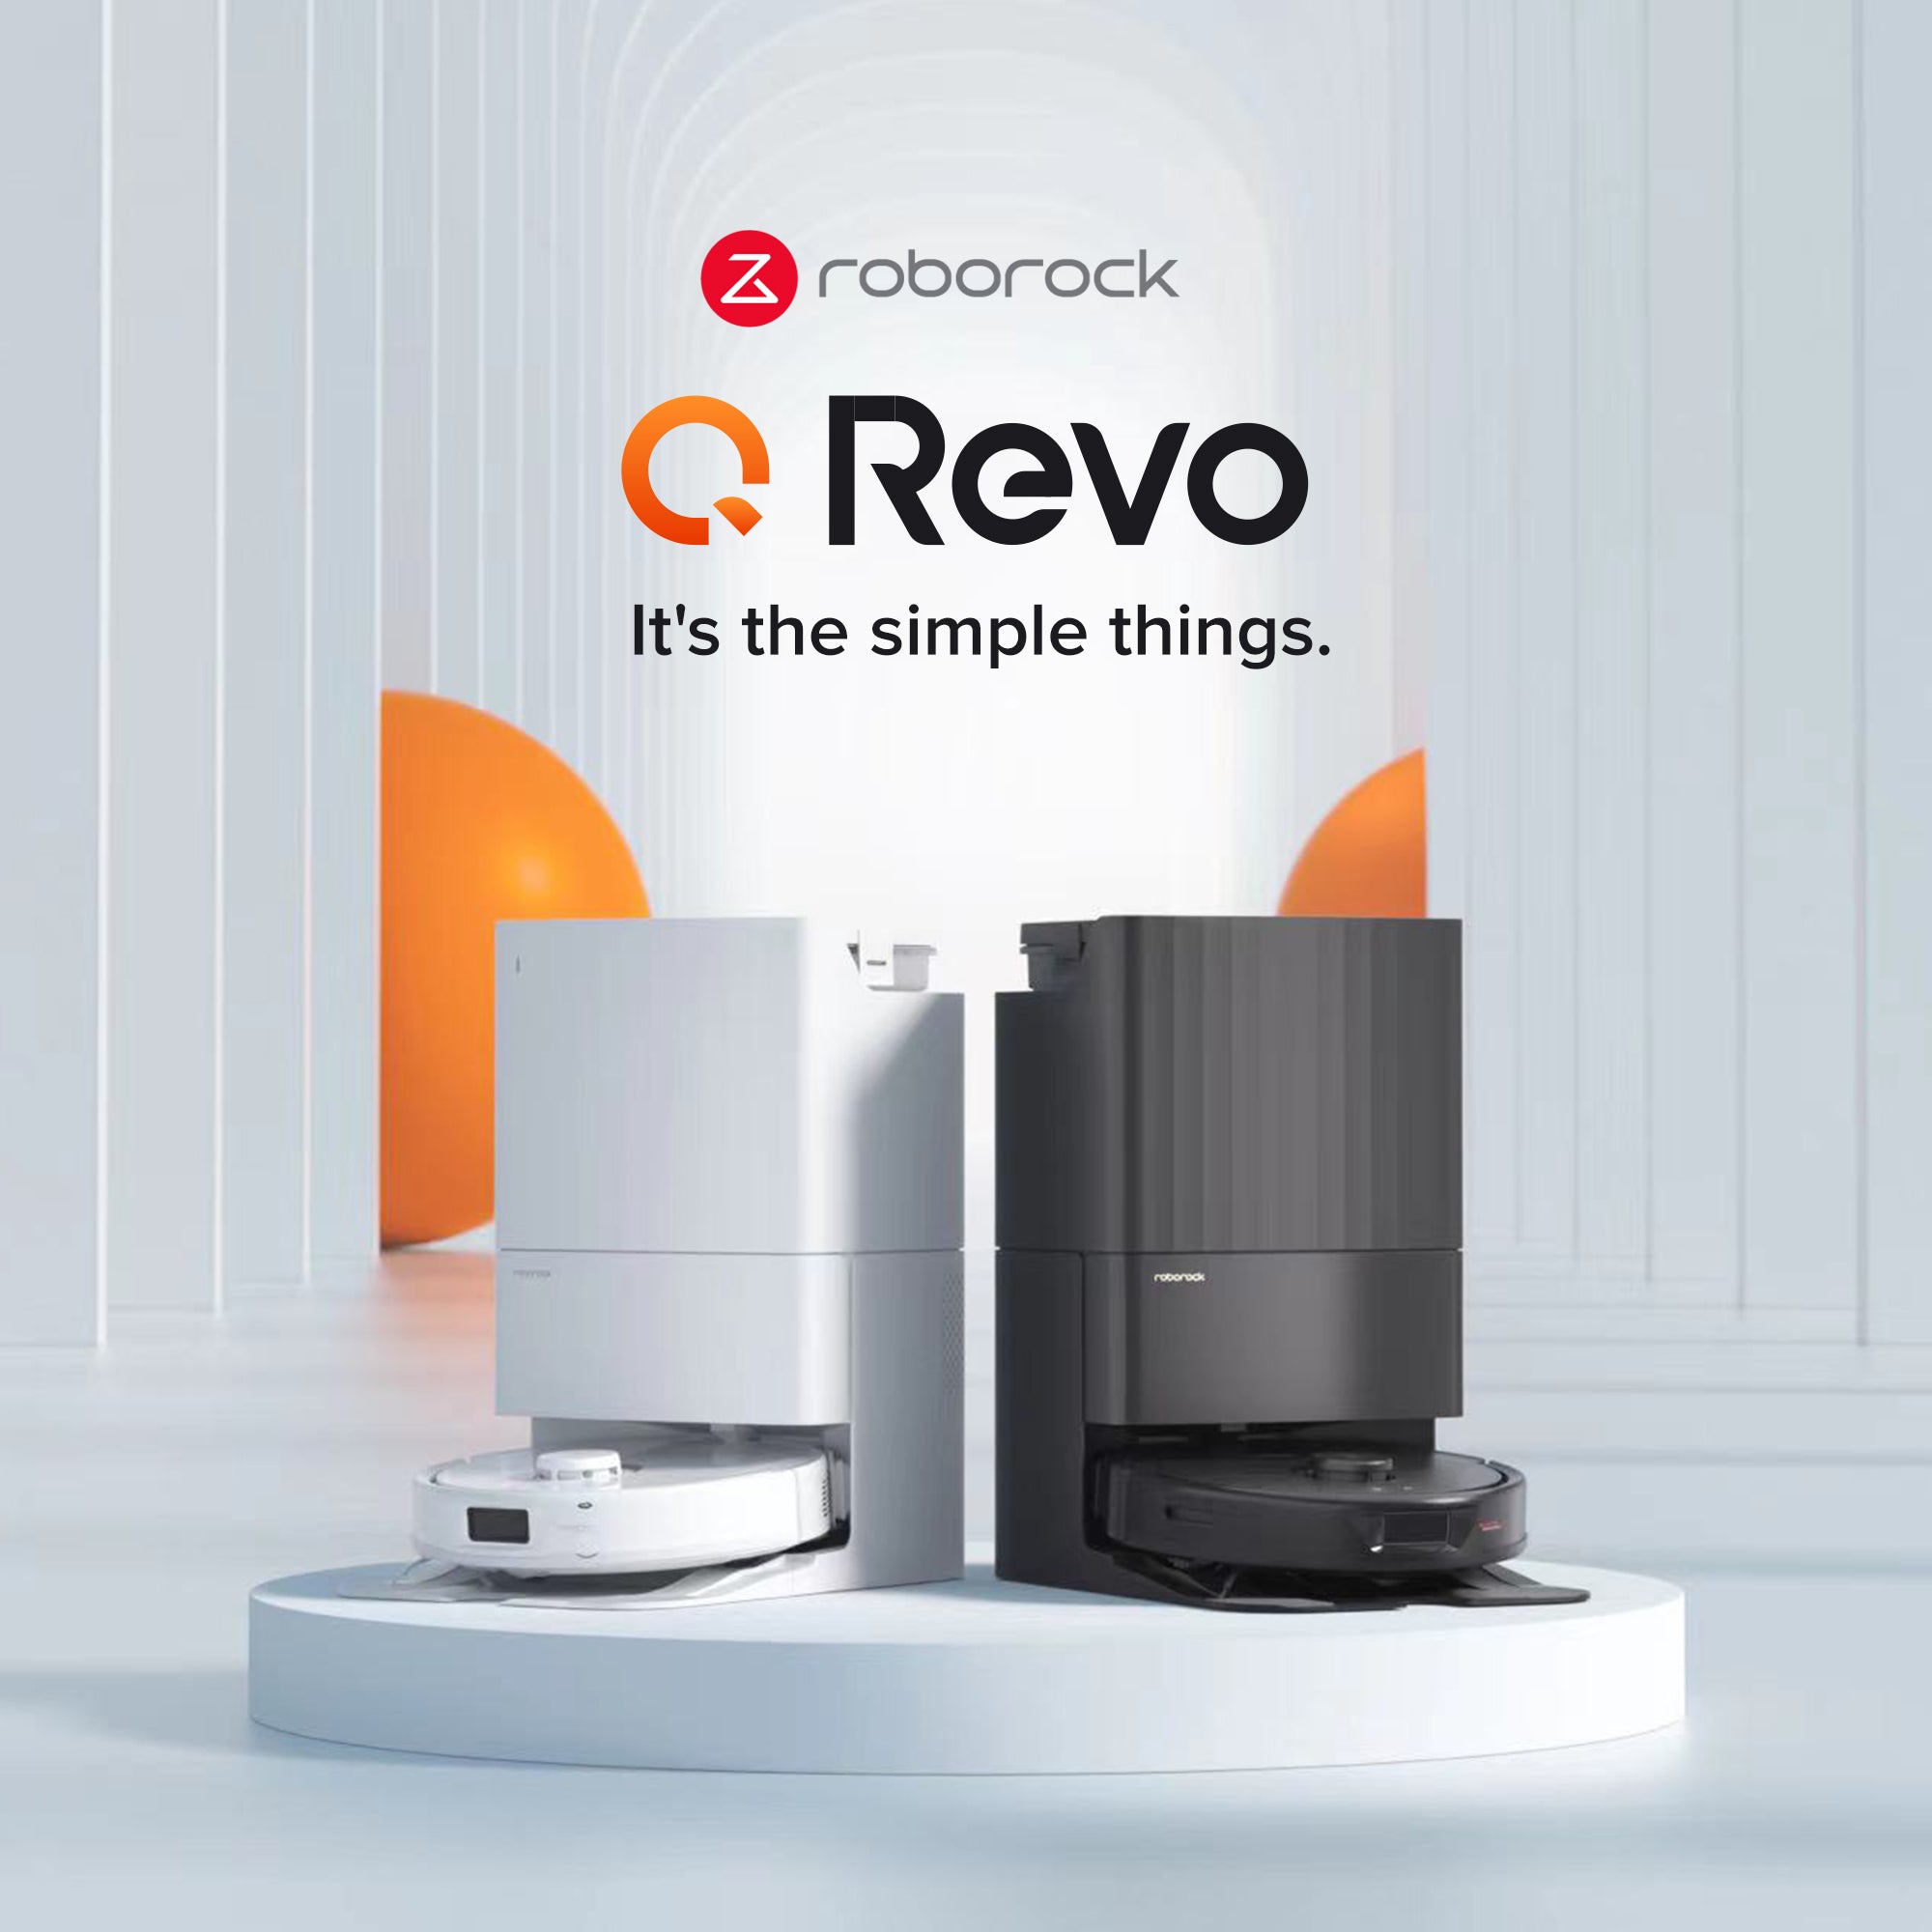 Reviews for ROBOROCK Q Revo Robotic Vacuum and Mop with Smart